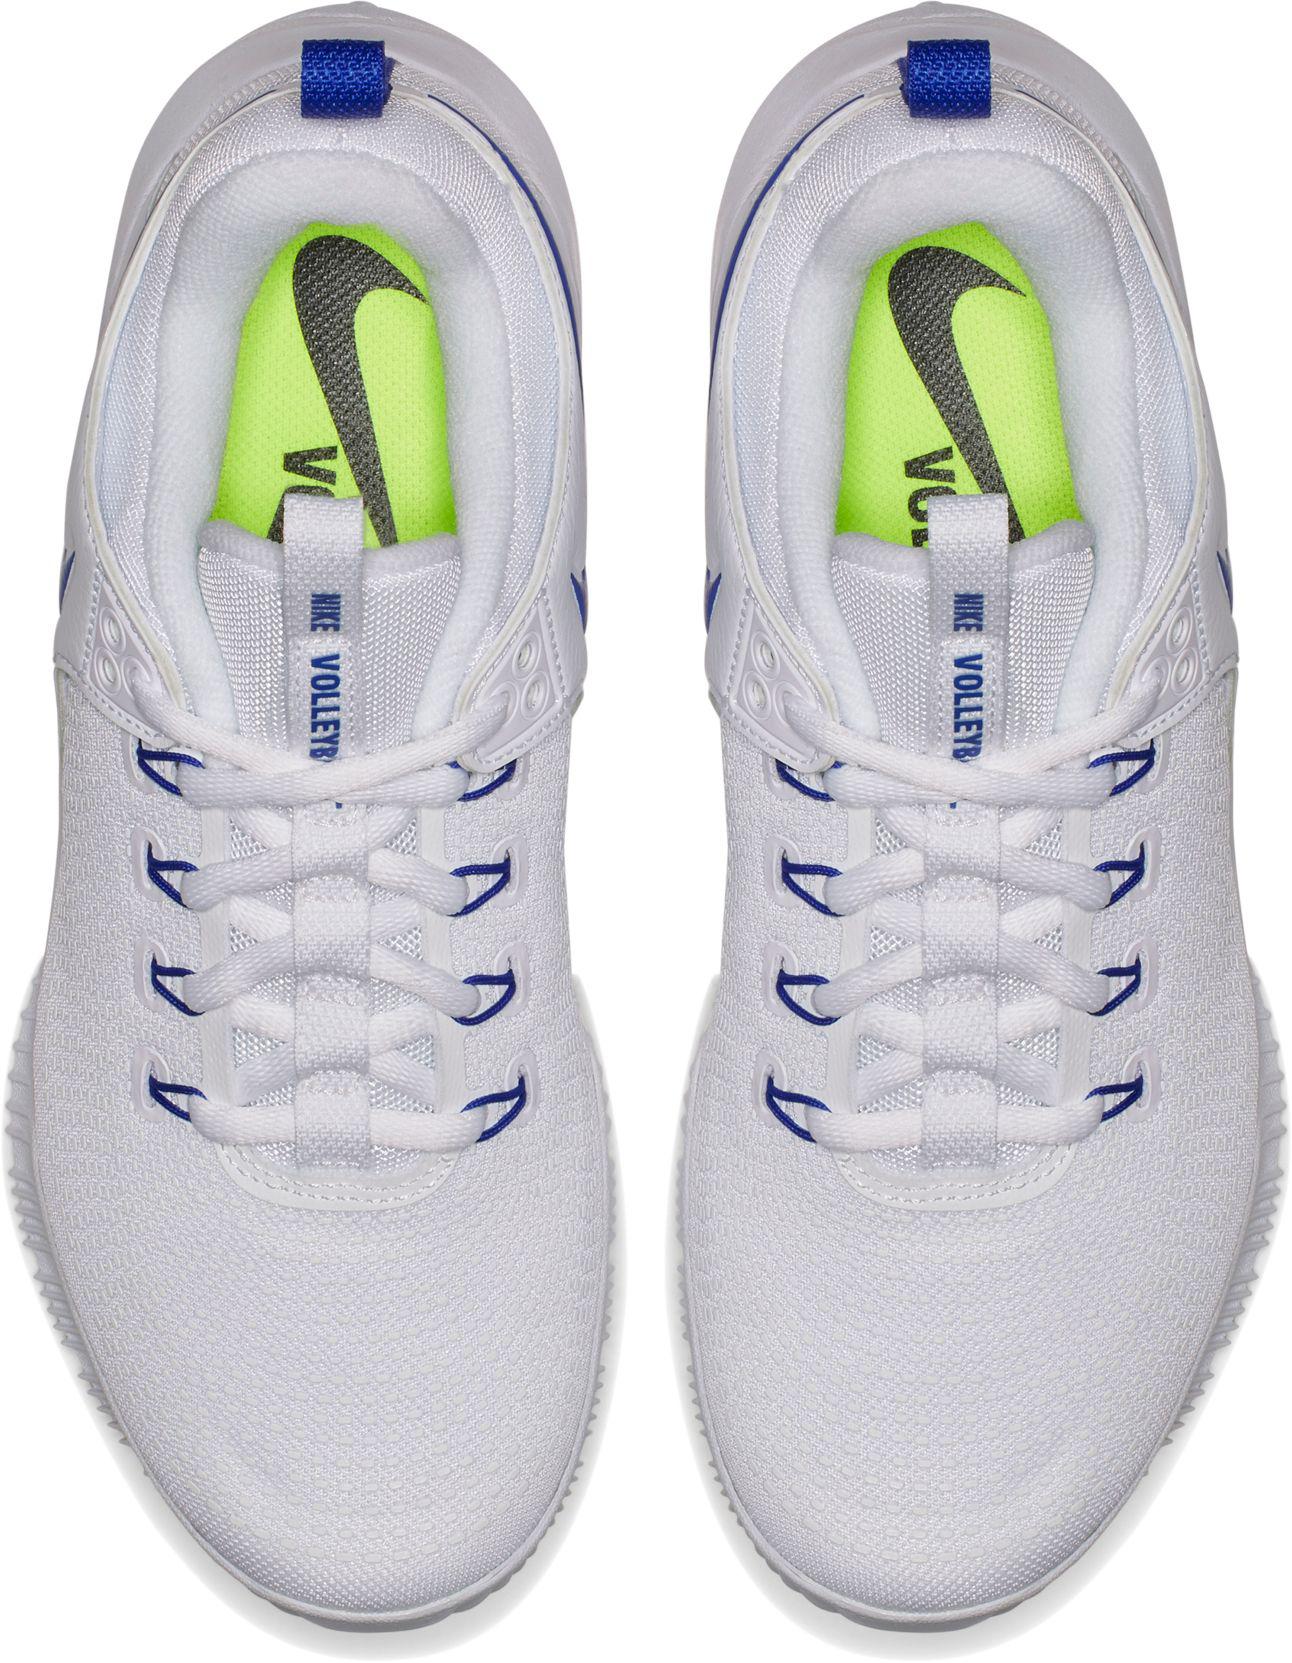 Nike Rubber Zoom Hyperace 2 Volleyball Shoes in White/Blue (Blue) - Lyst